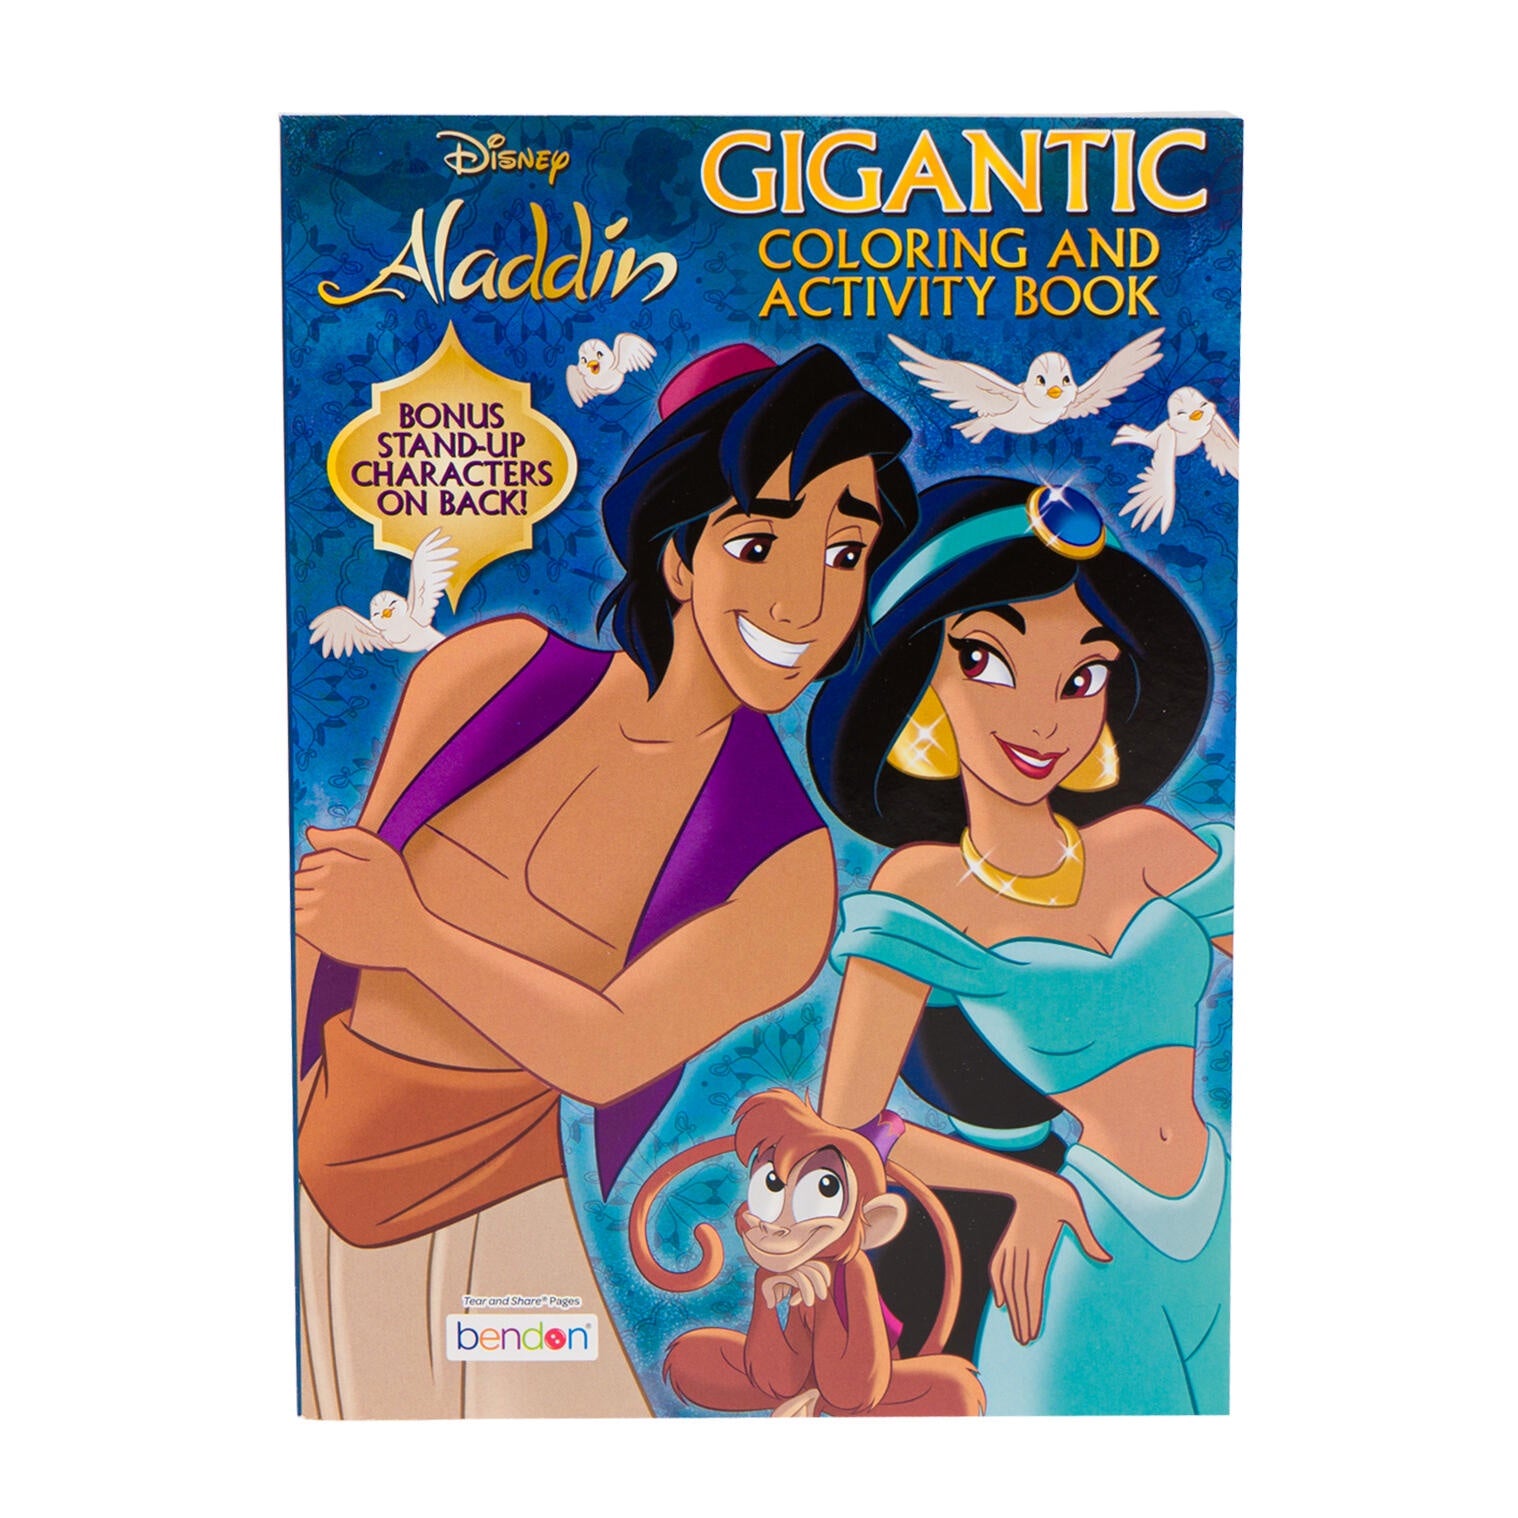 Aladdin Gigantic Coloring and Activity Book